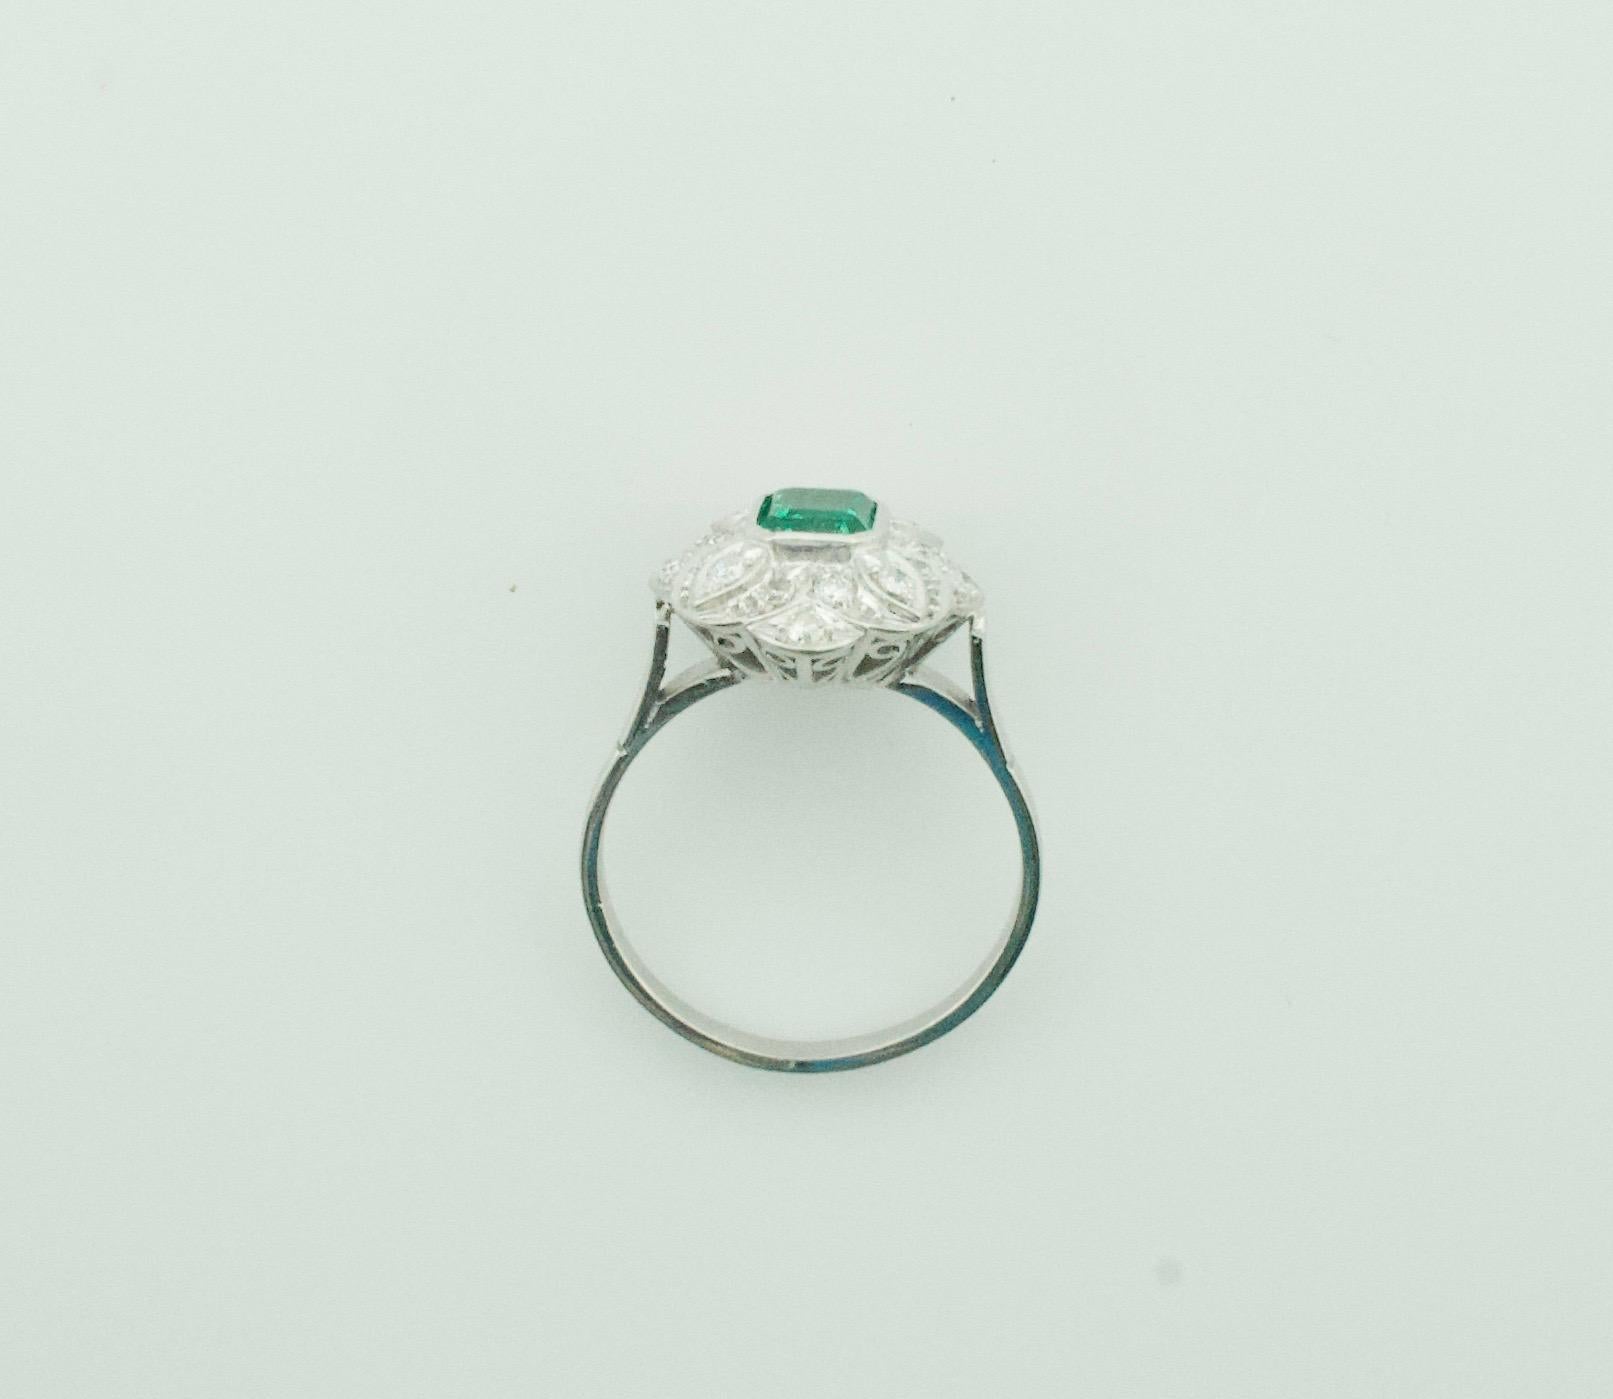 Art Deco Emerald and Diamond Ring in Platinum For Sale 1